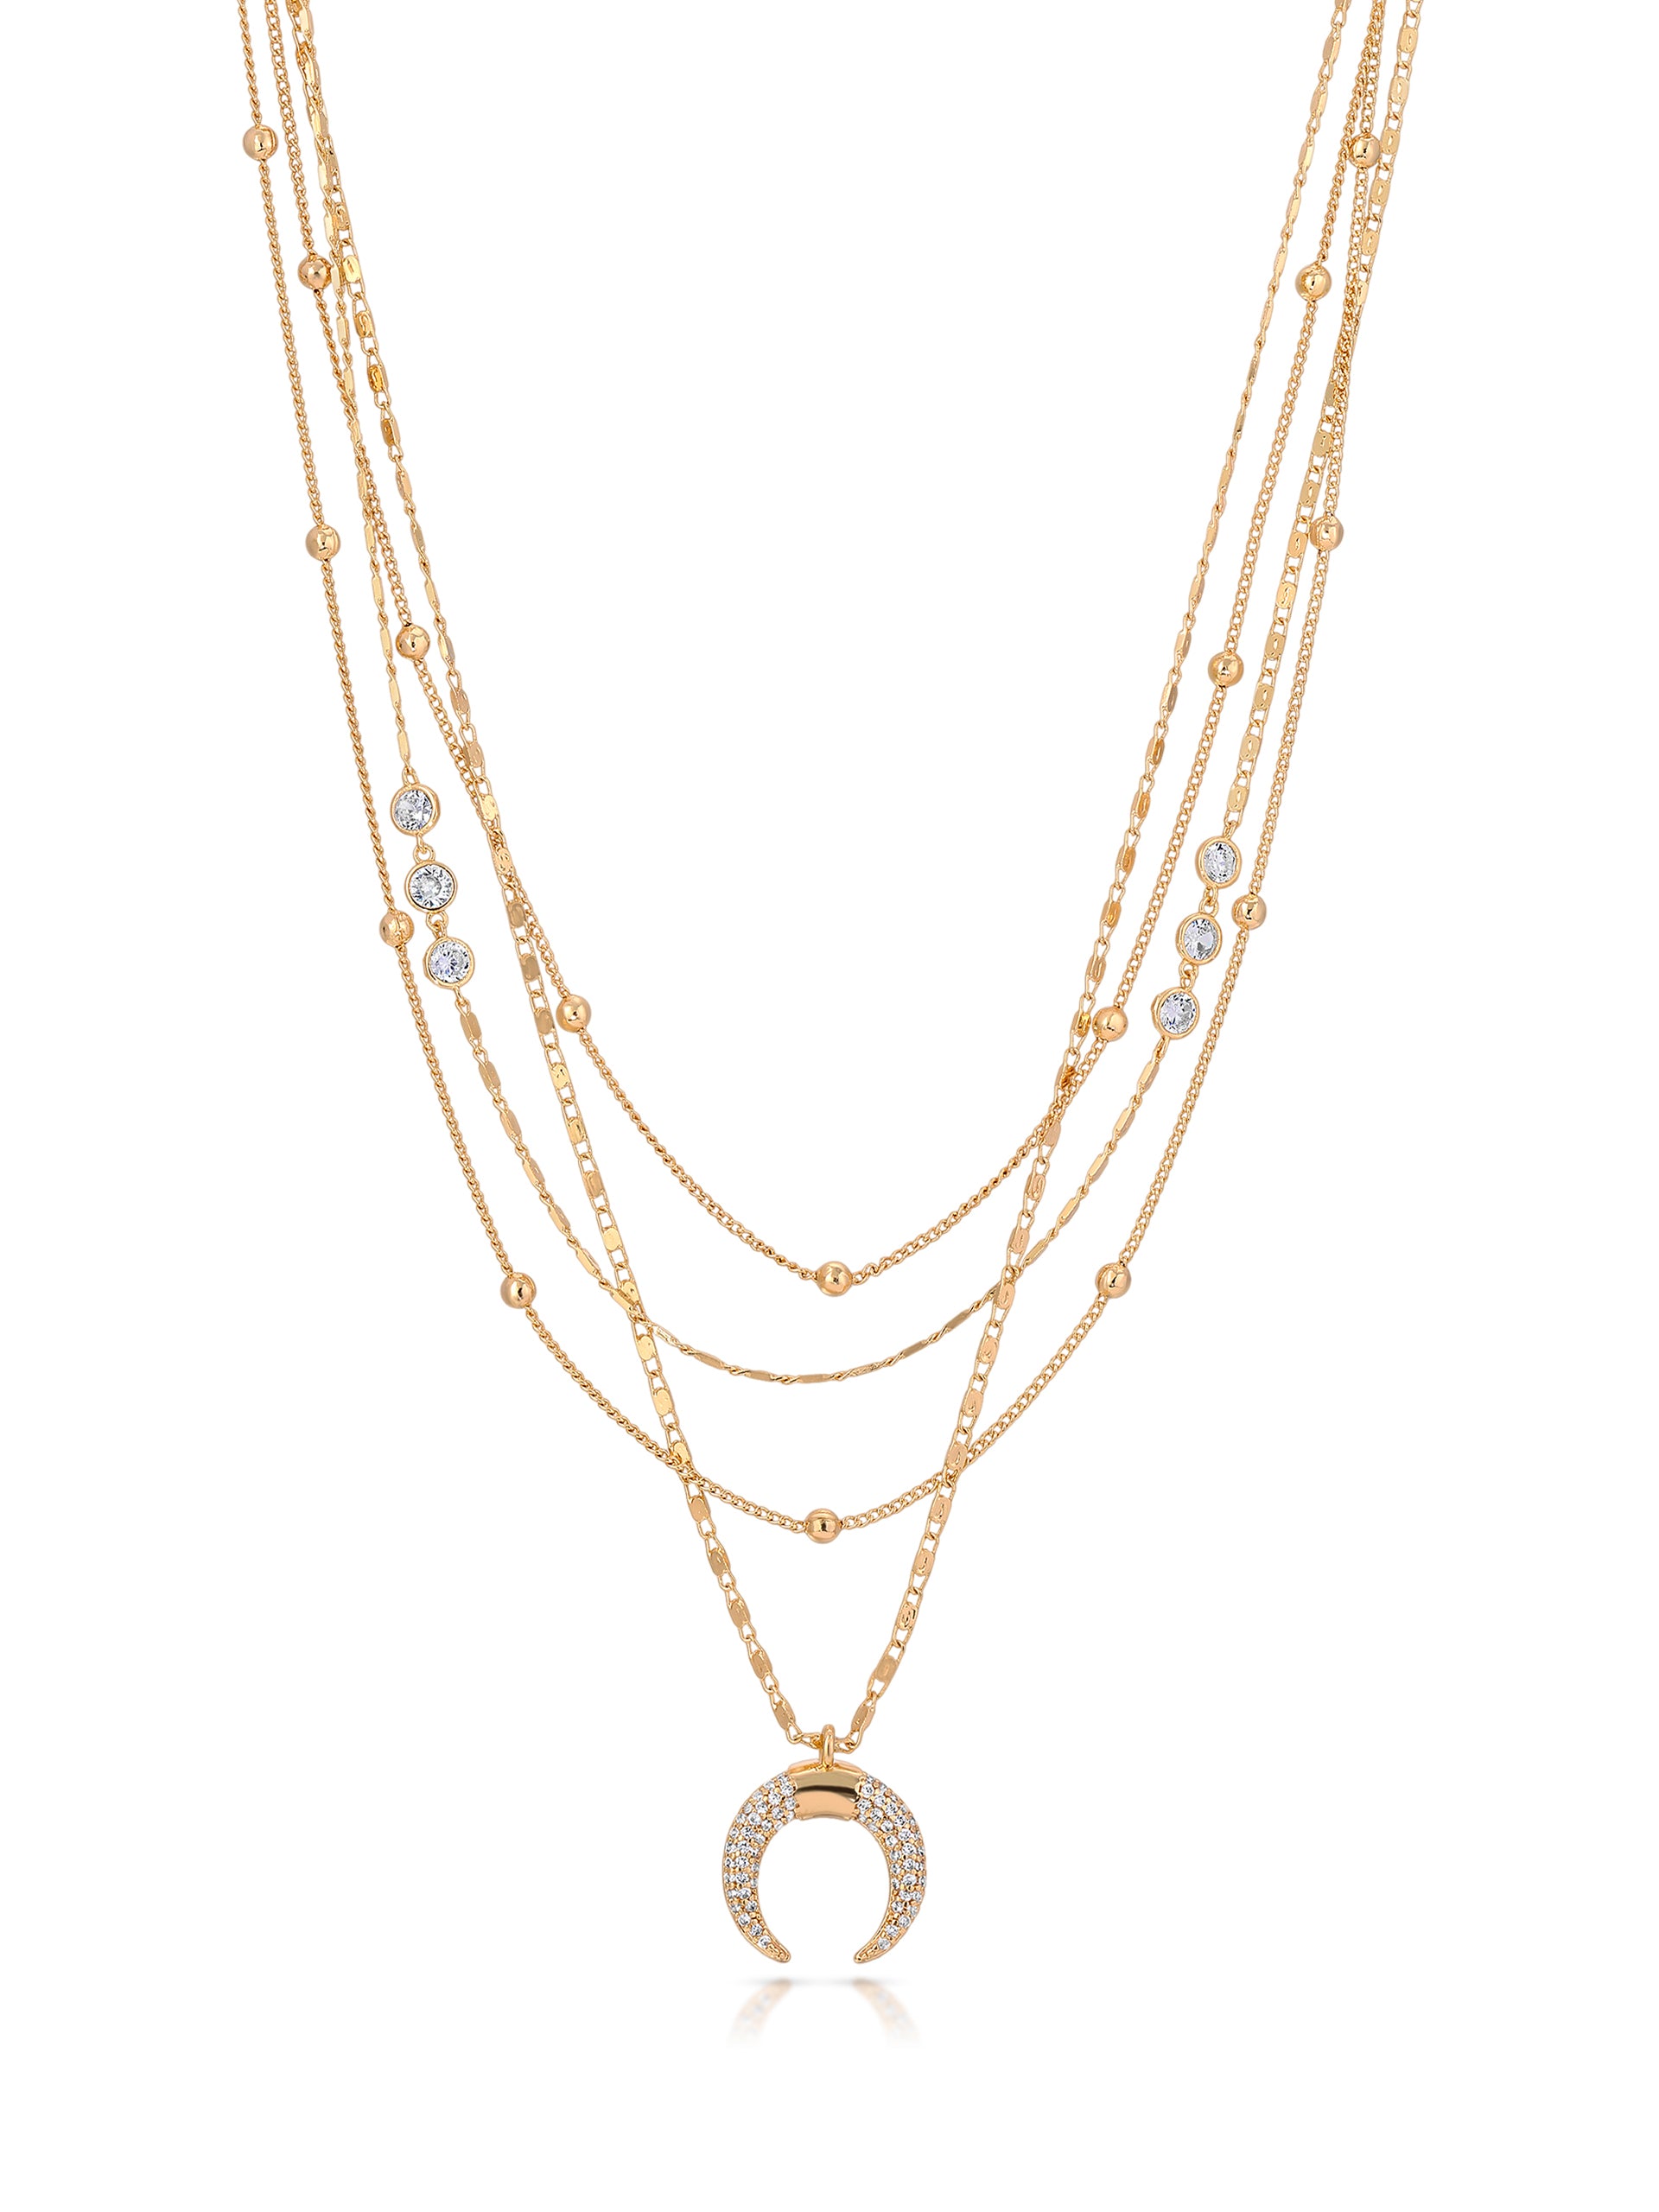 Layered Gold Chain & Crescent Horn Necklace